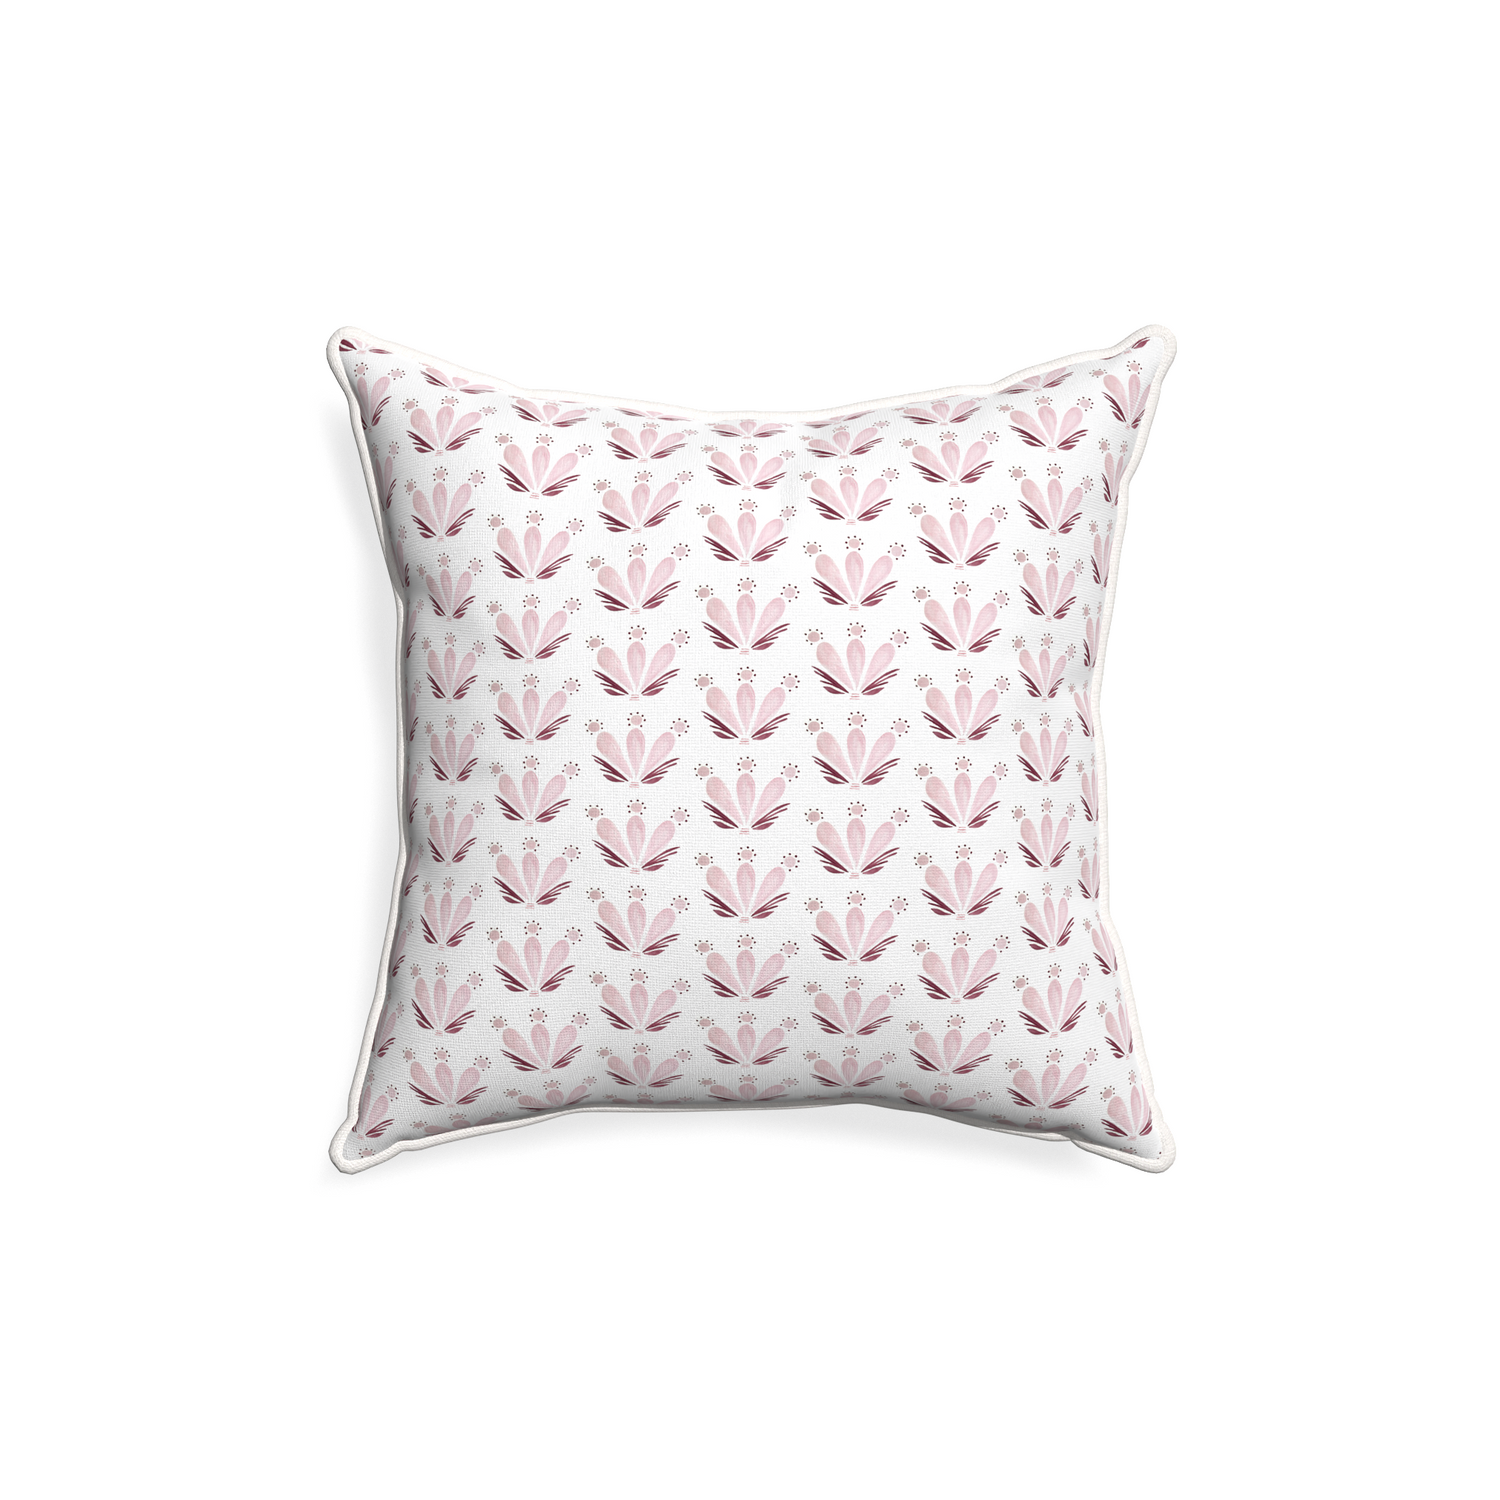 18-square serena pink custom pillow with snow piping on white background